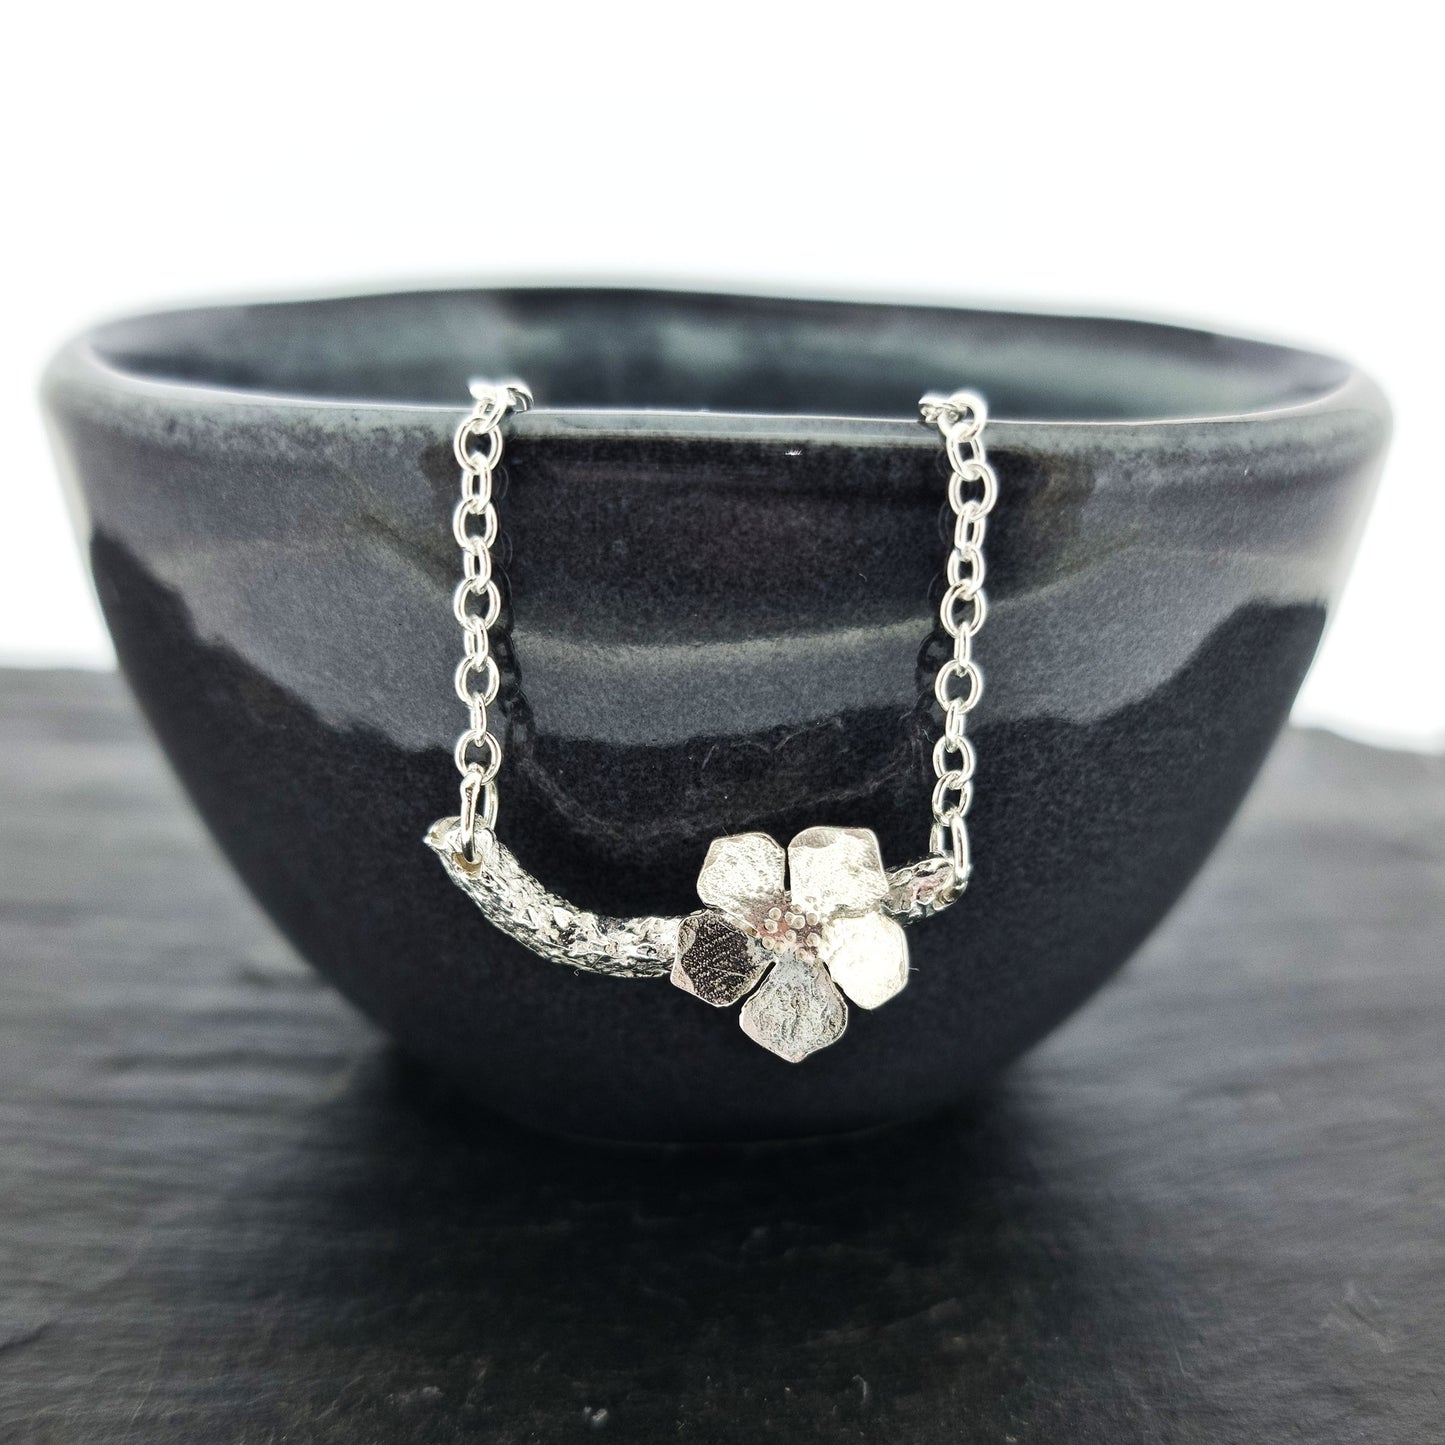 Silver necklace with small branch and a single 5 petal flower on it. Shown on a black bowl.